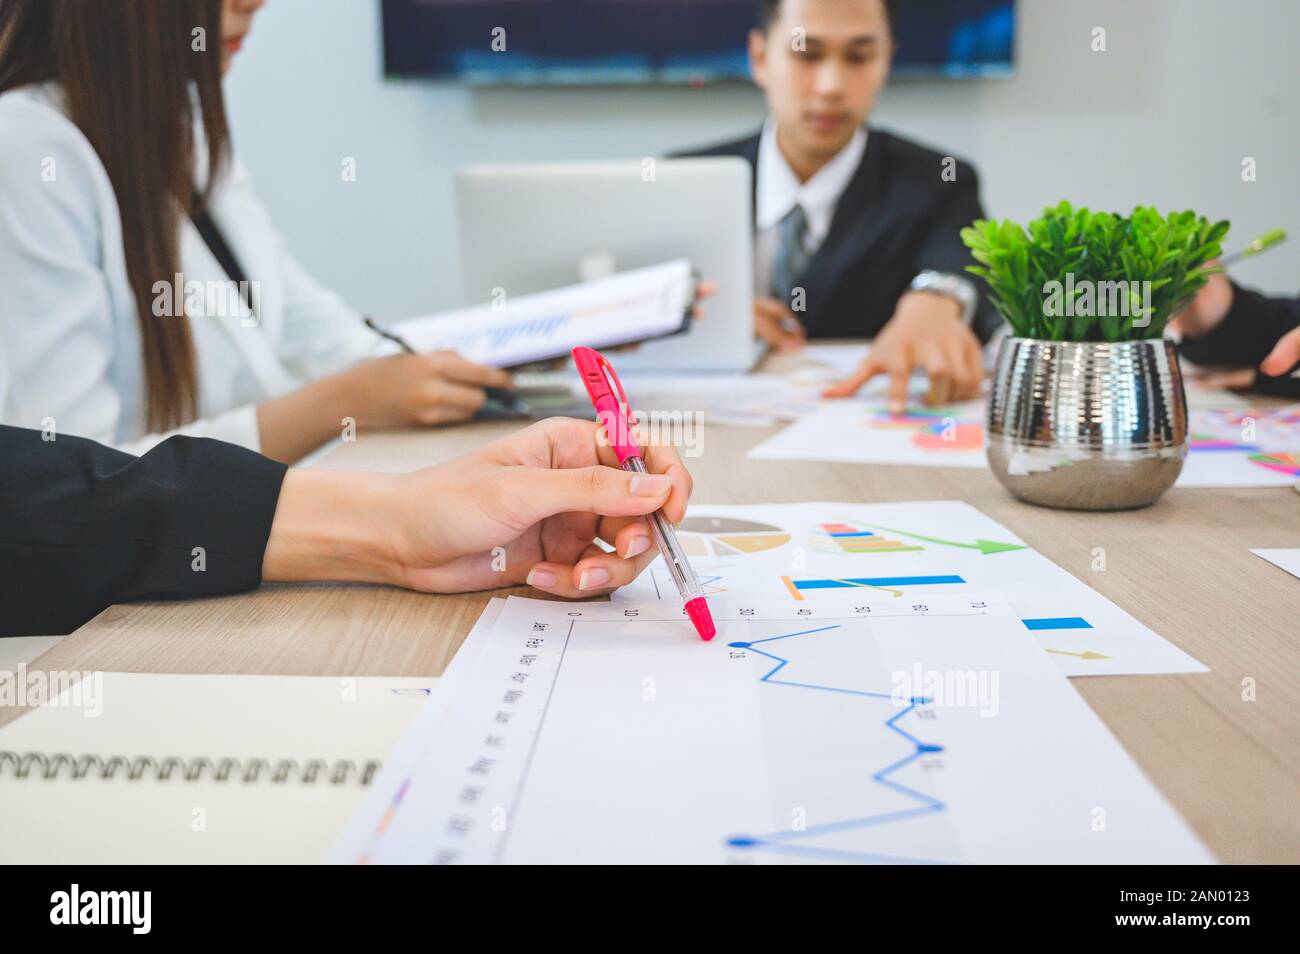 Business people are meeting and graphing business growth on a desk Stock Photo